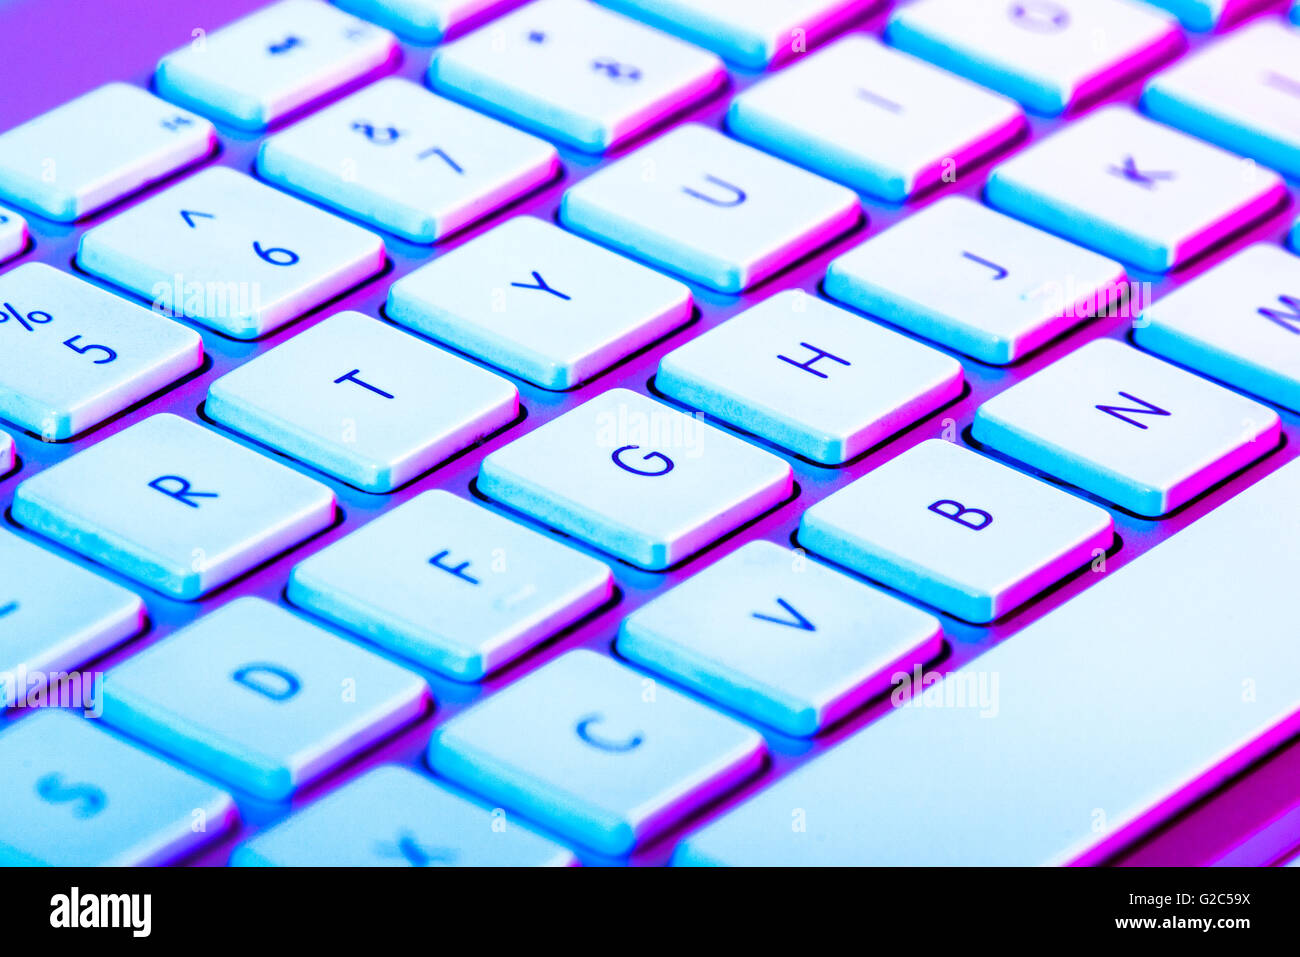 Close-up of keyboard in dim colourful lighting Stock Photo